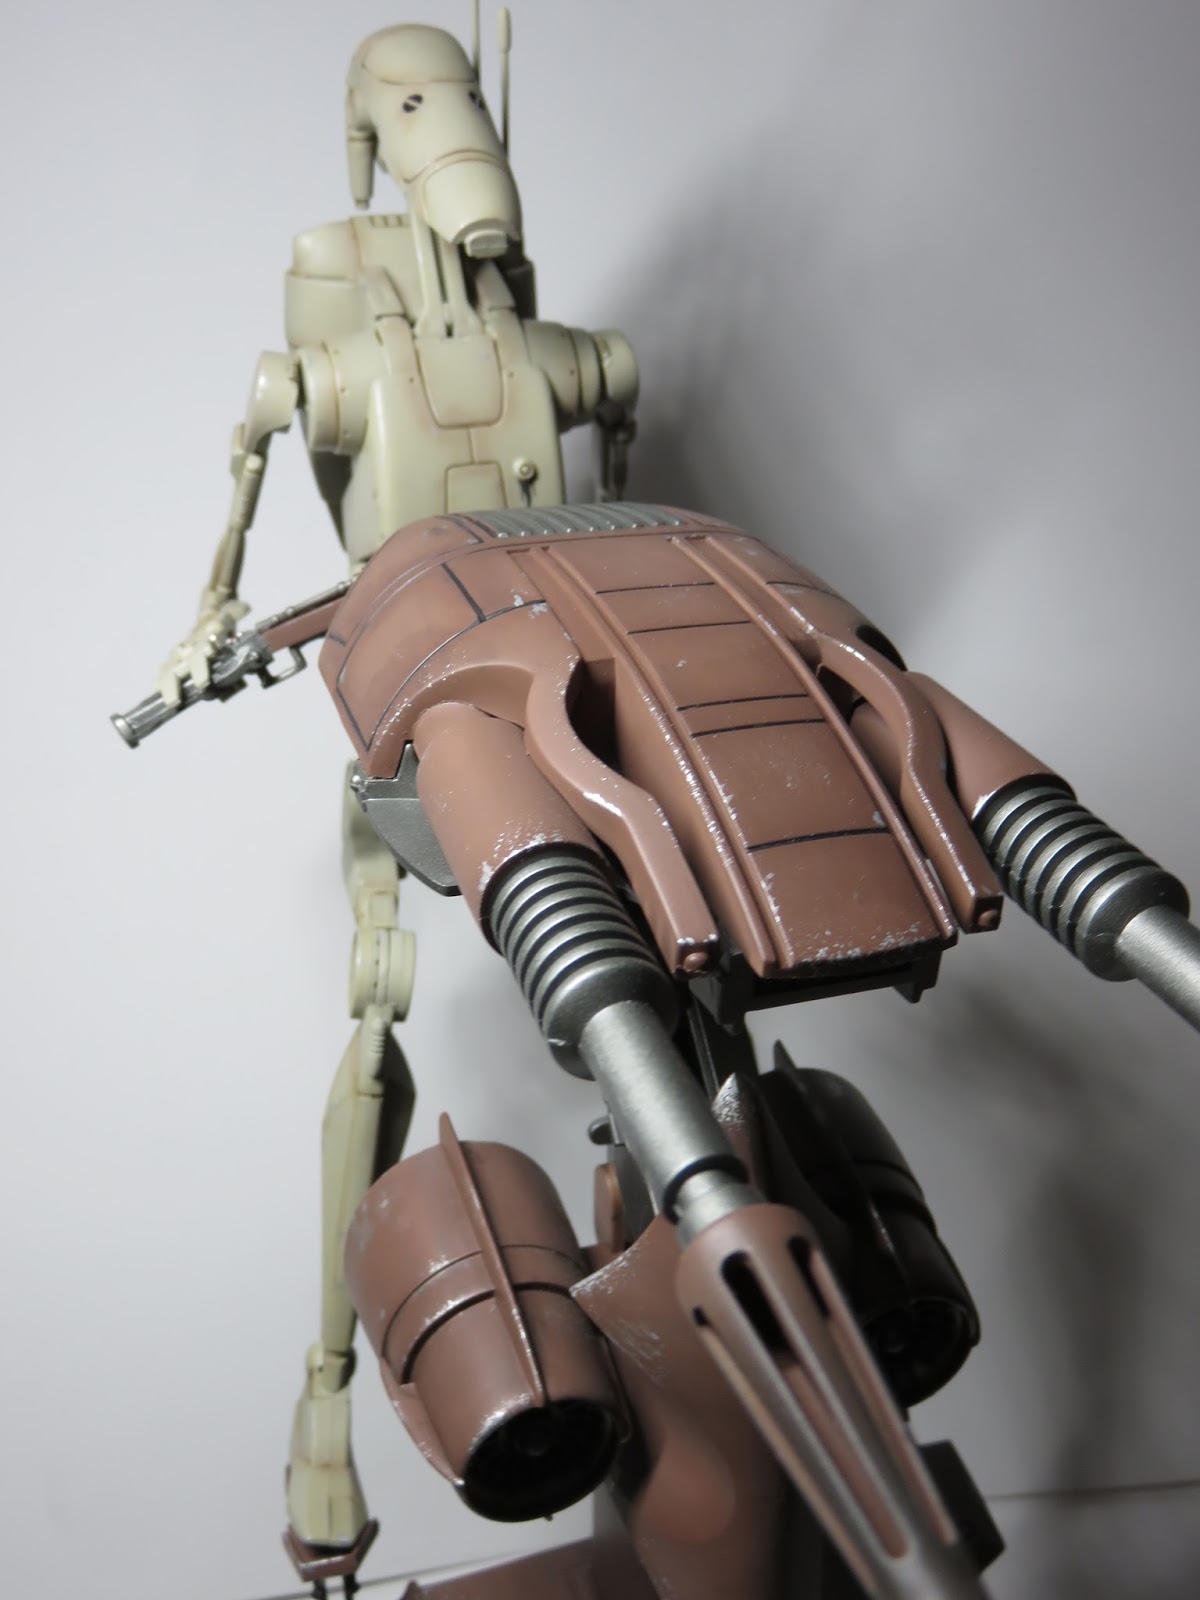 STAP and Battle Droid from Star Wars - The Phantom Menace by AMT